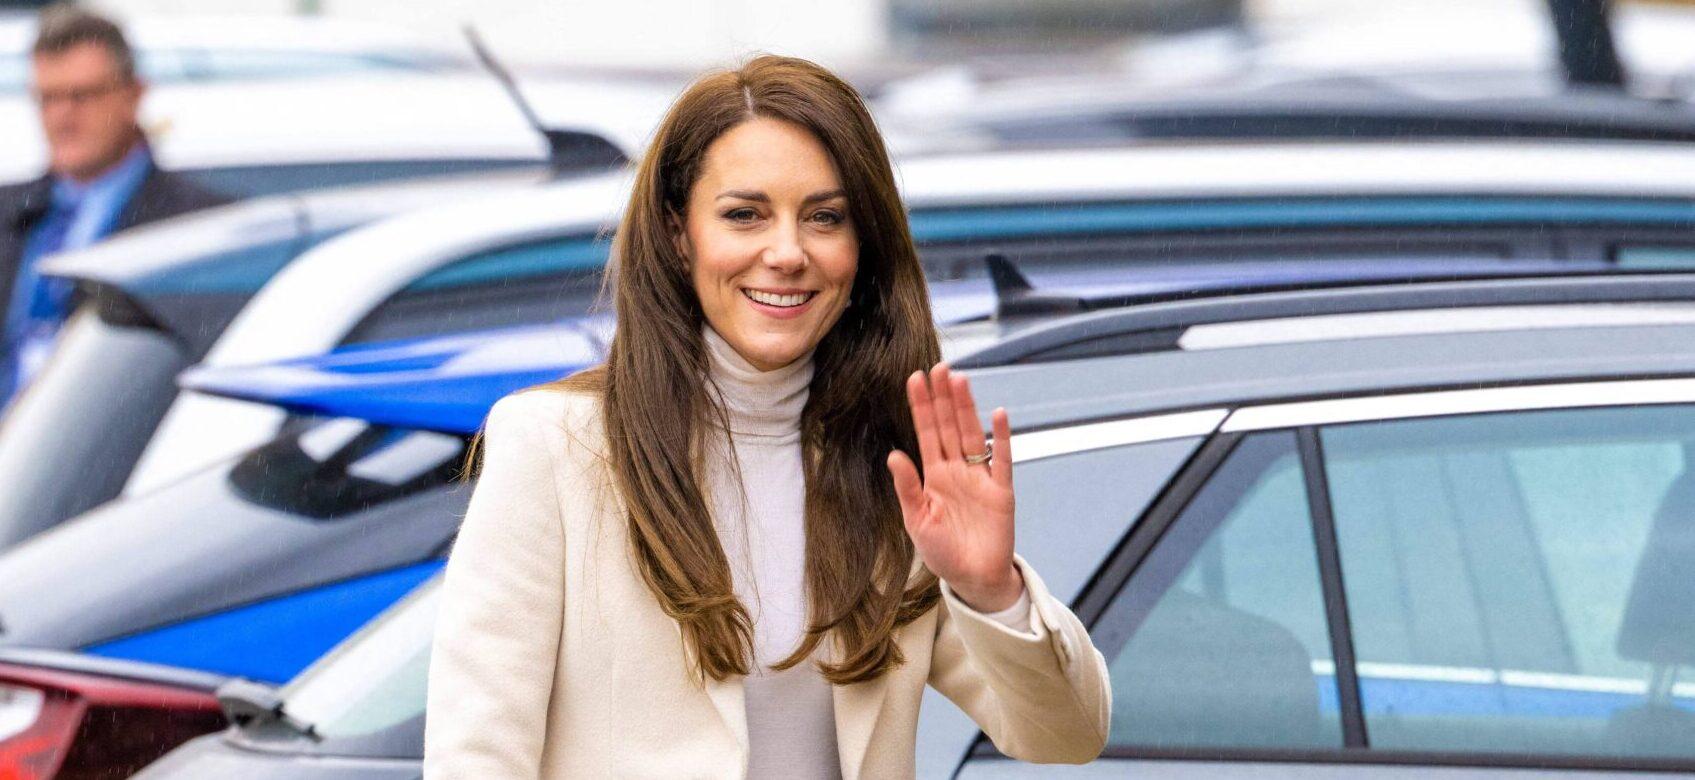 Kate Middleton Caught On Video For The First Time Since Her Surgery, But Fans Are Still In Doubt